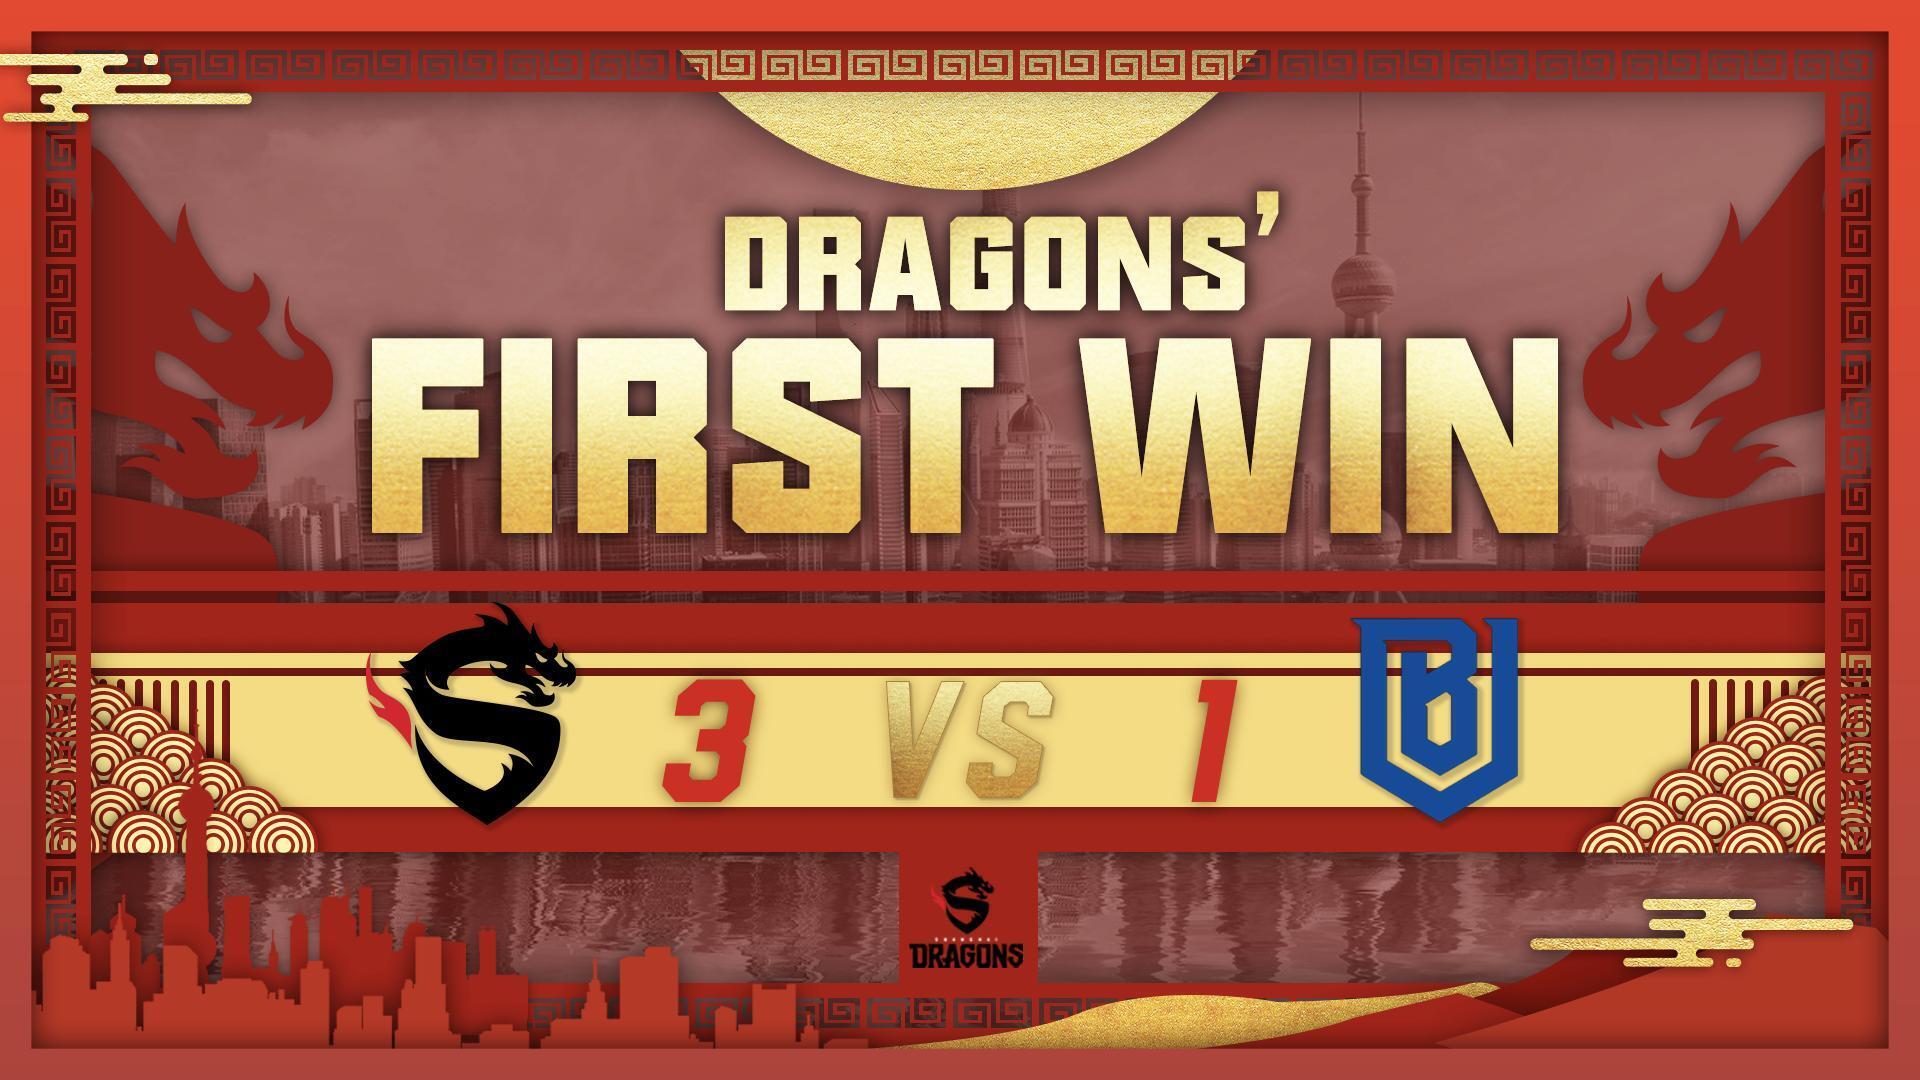 After 42 consecutive losses, the Shanghai Dragons have finally won their first game ever. (Image courtesy of Shanghai Dragons)